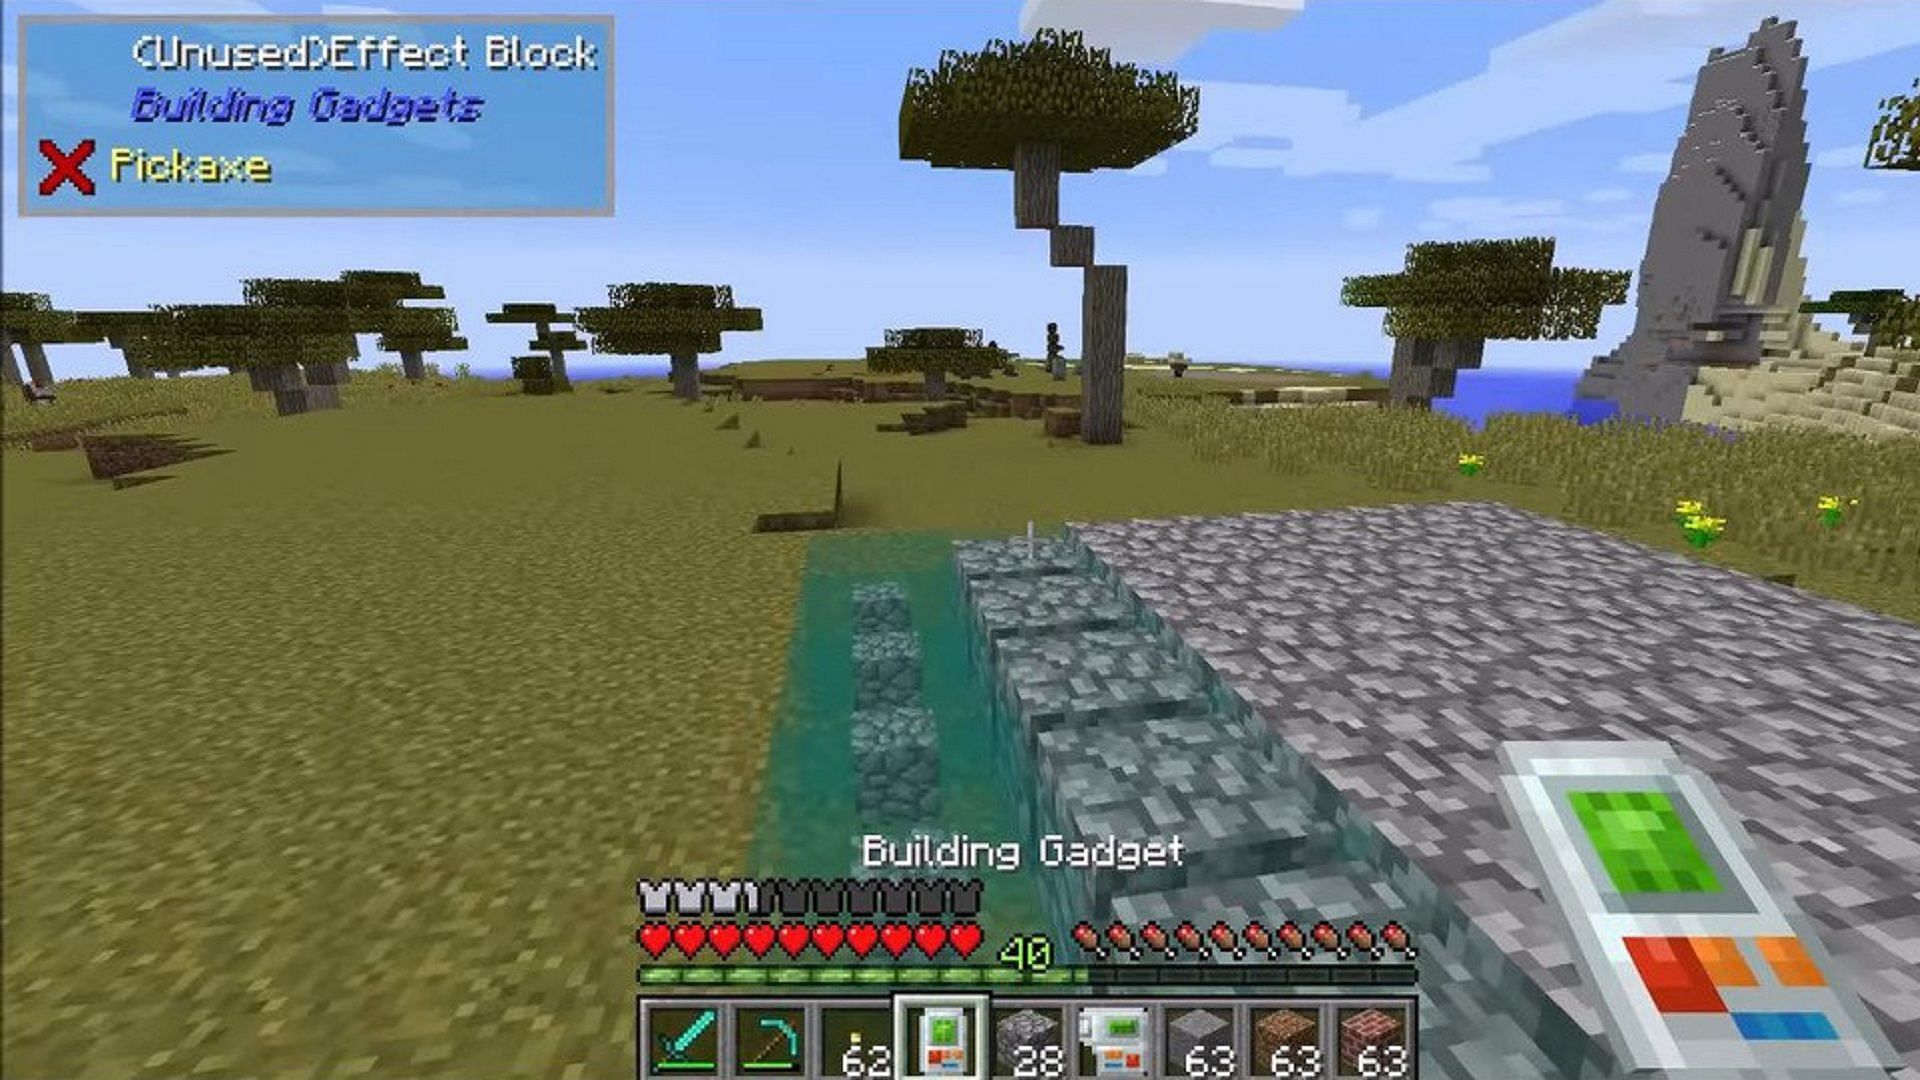 A player uses the Building Gadget on their structure (Image via 9Minecraft)